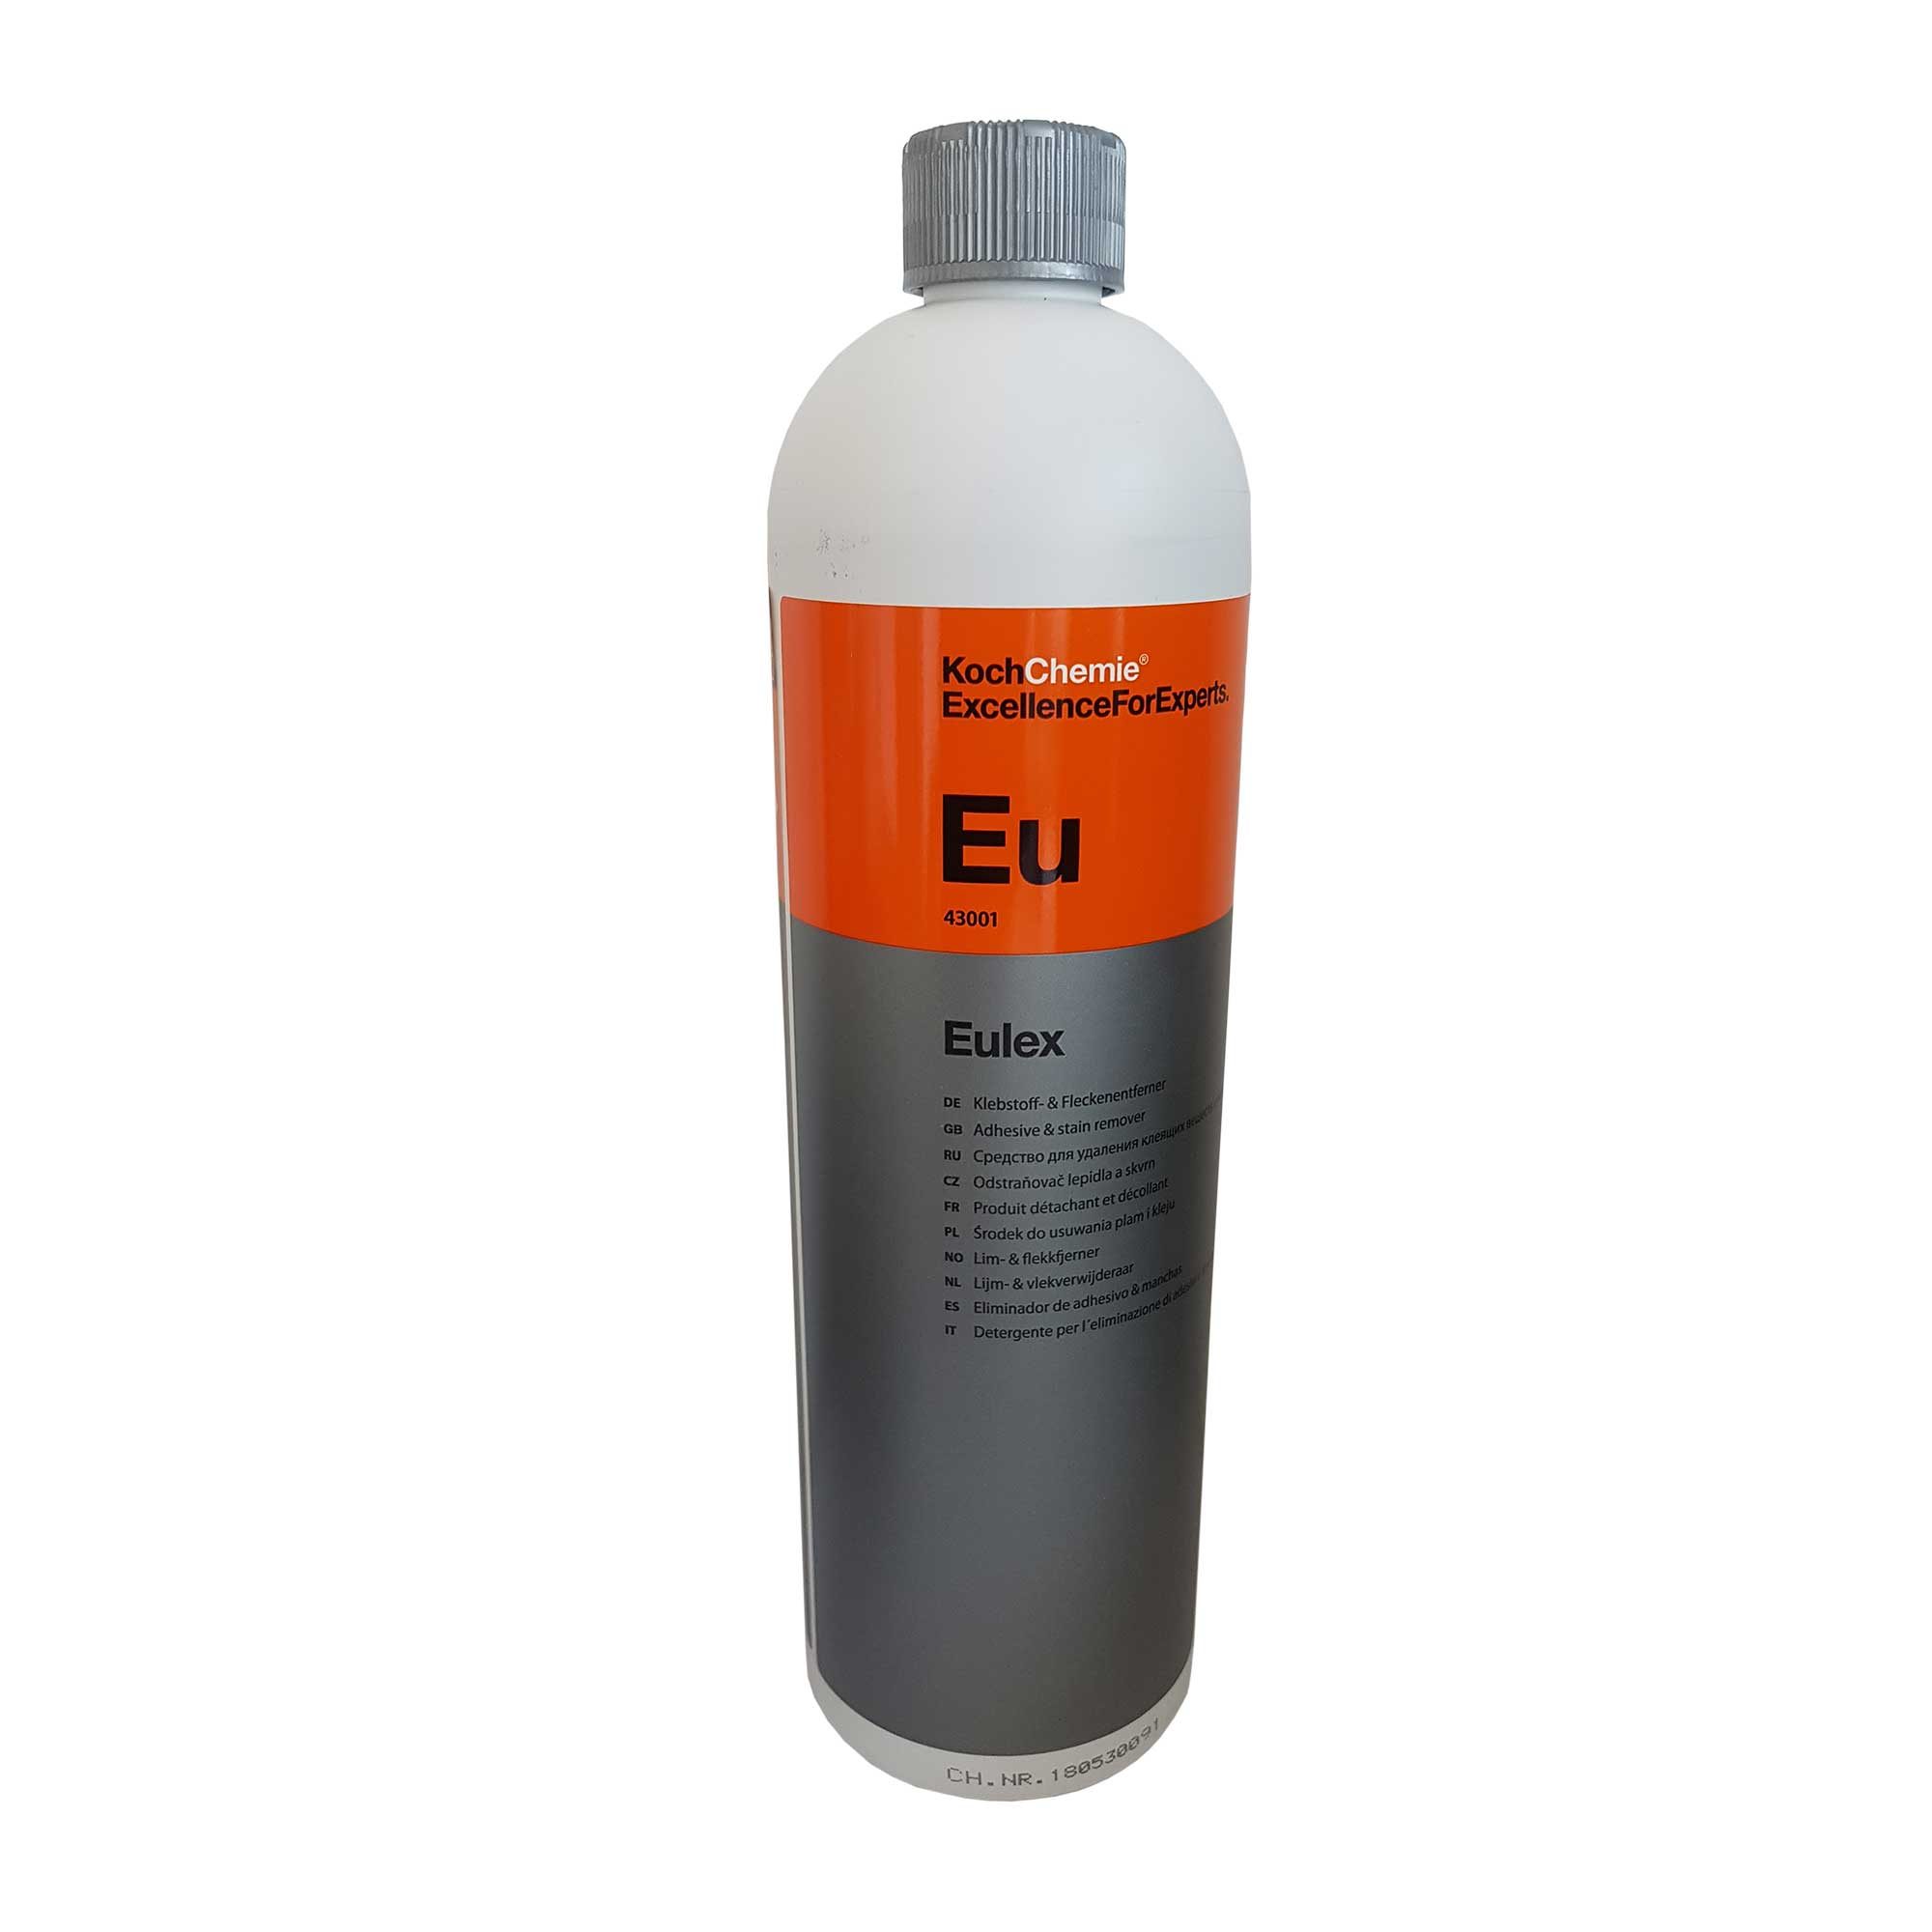 Koch Chemie Eulex Tar and Adhesive Remover 1 Liter